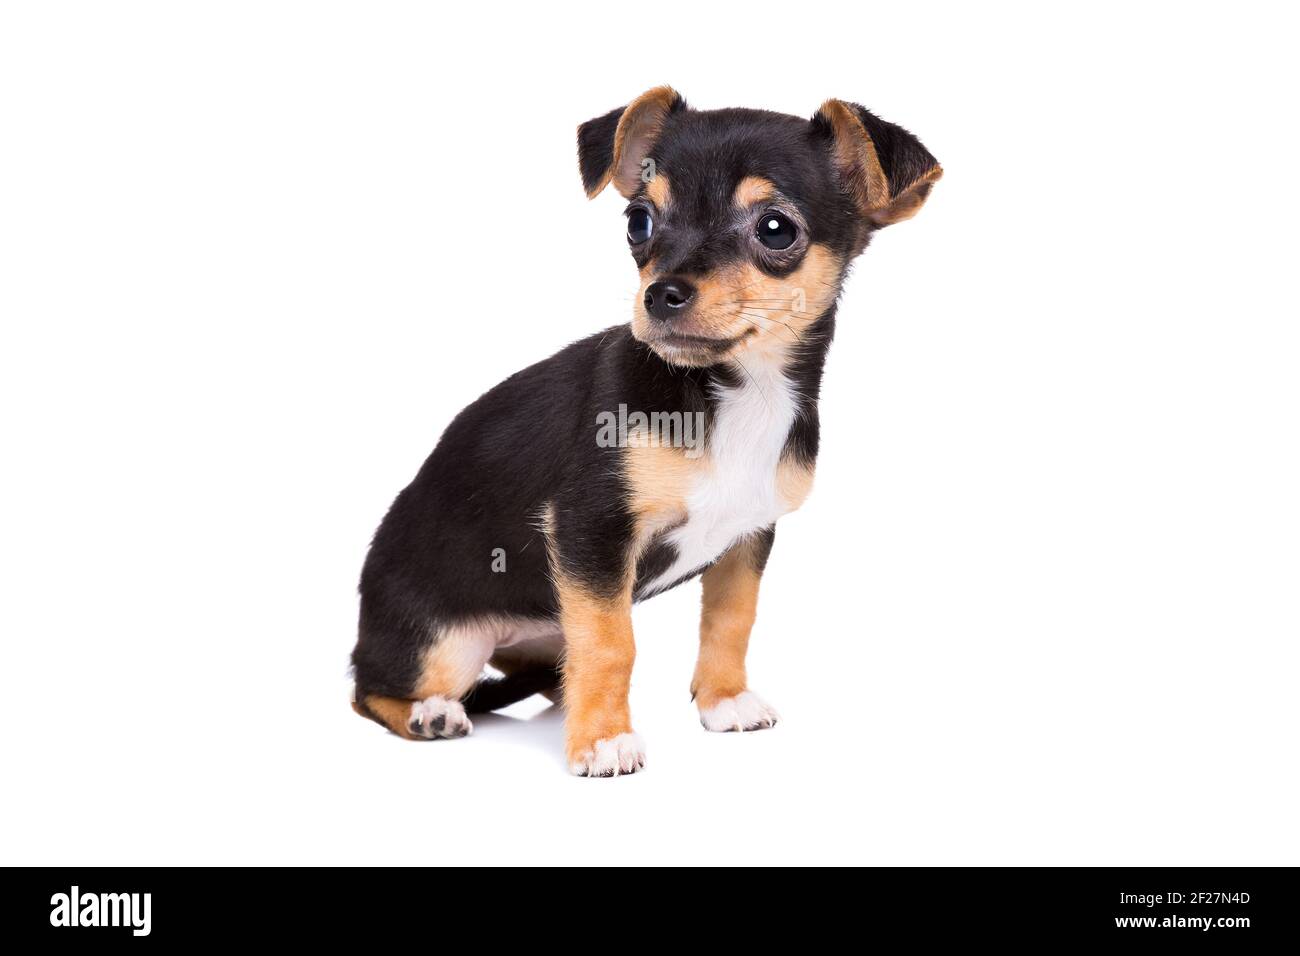 Short haired chihuahua puppy Stock Photo